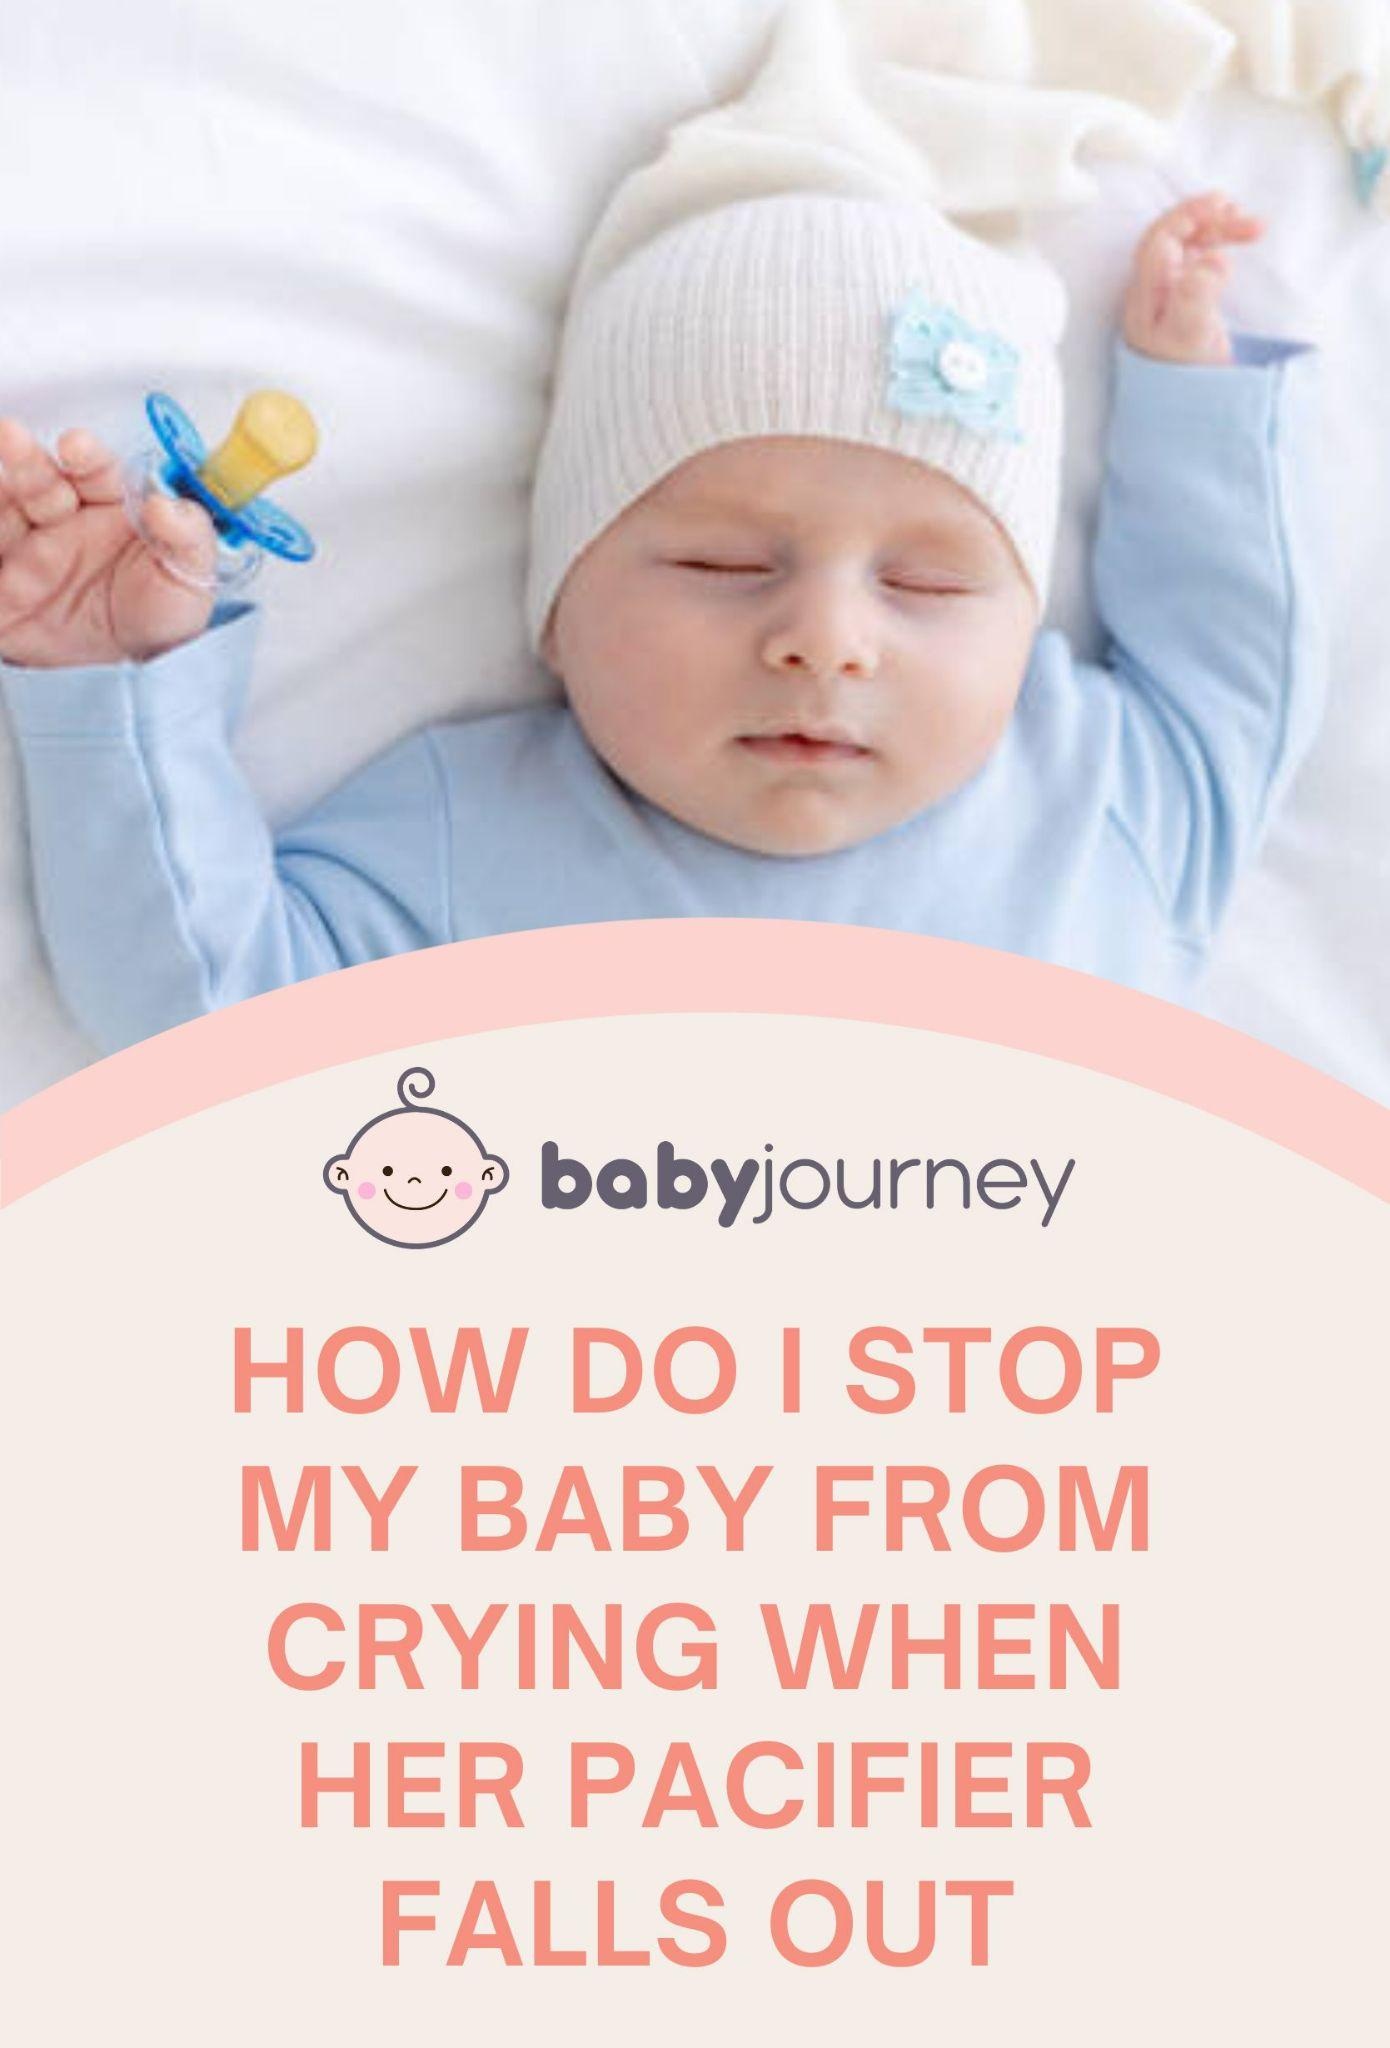 How Do I Stop My Baby From Crying When Her Pacifier Falls Out Pinterest Image - Baby Journey 